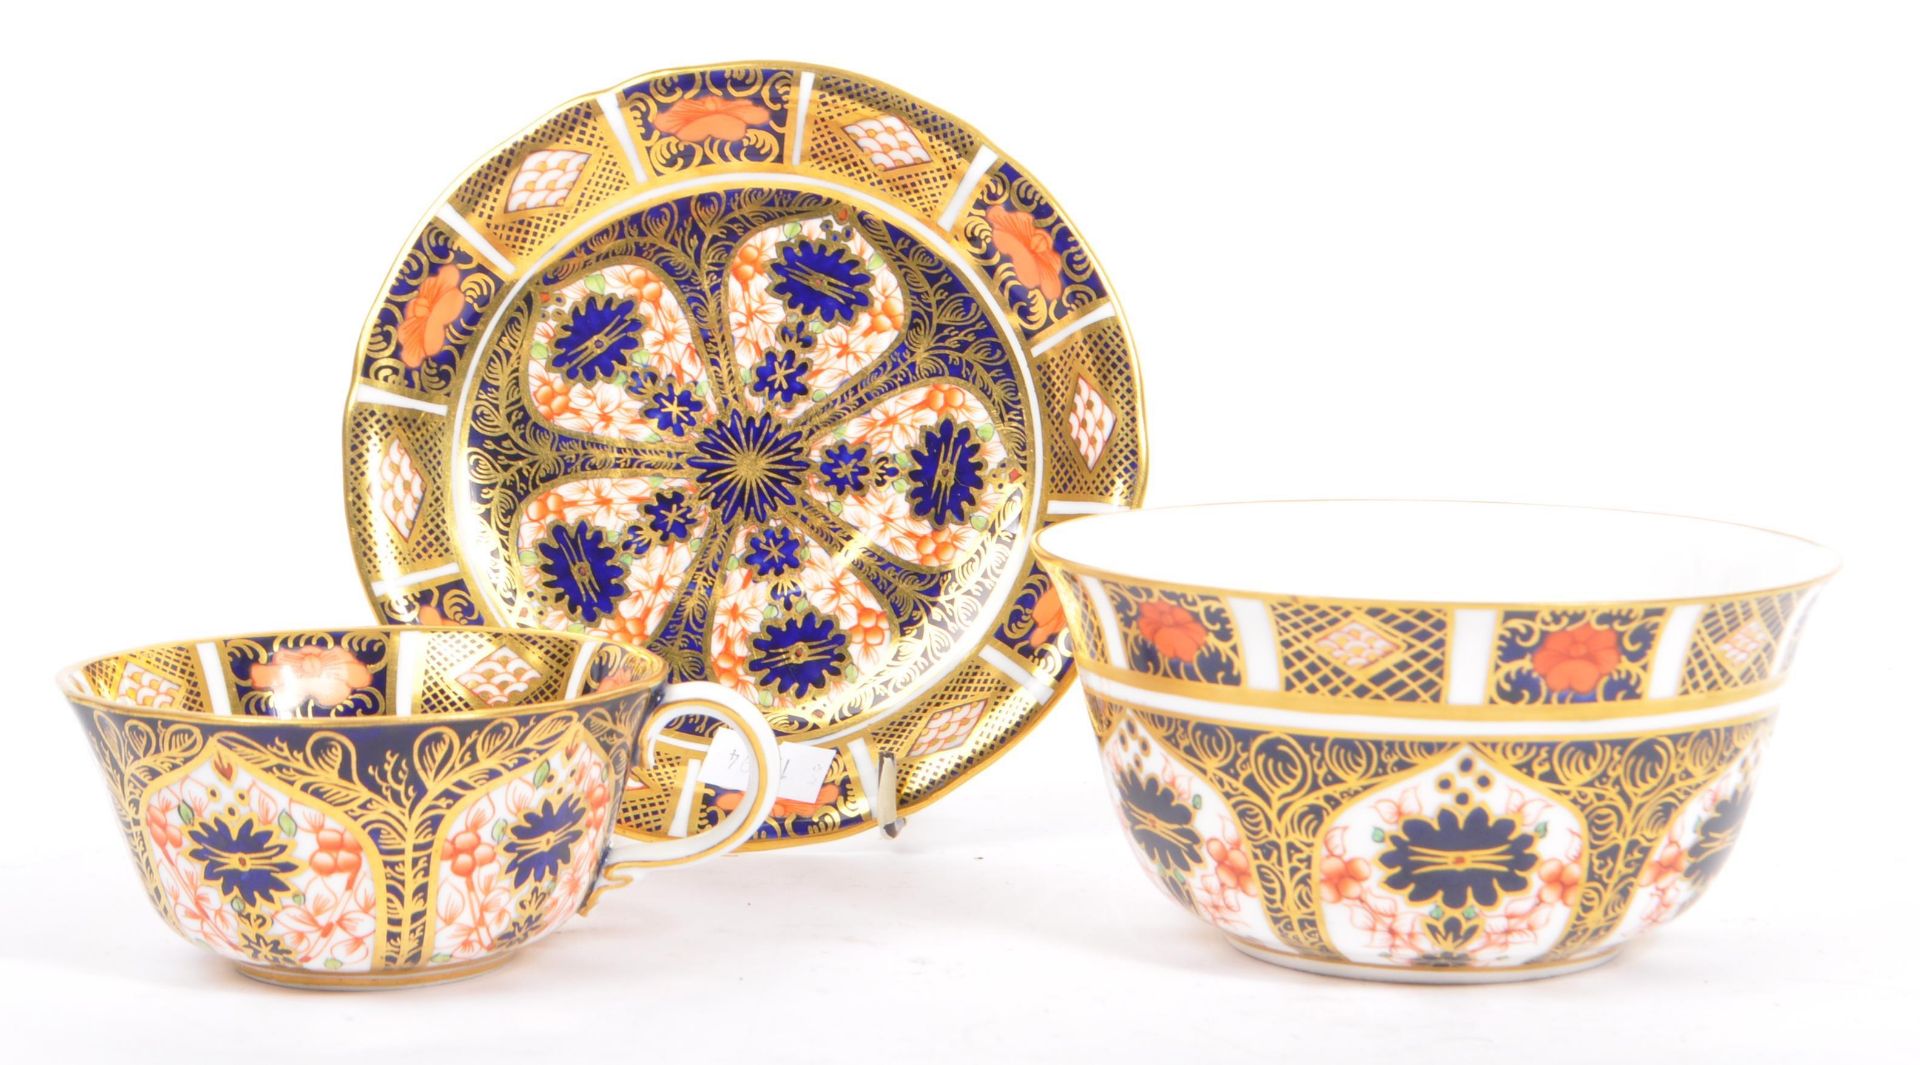 COLLECTION OF ROYAL CROWN DERBY IMARI PATTERN CHINA EXAMPLES